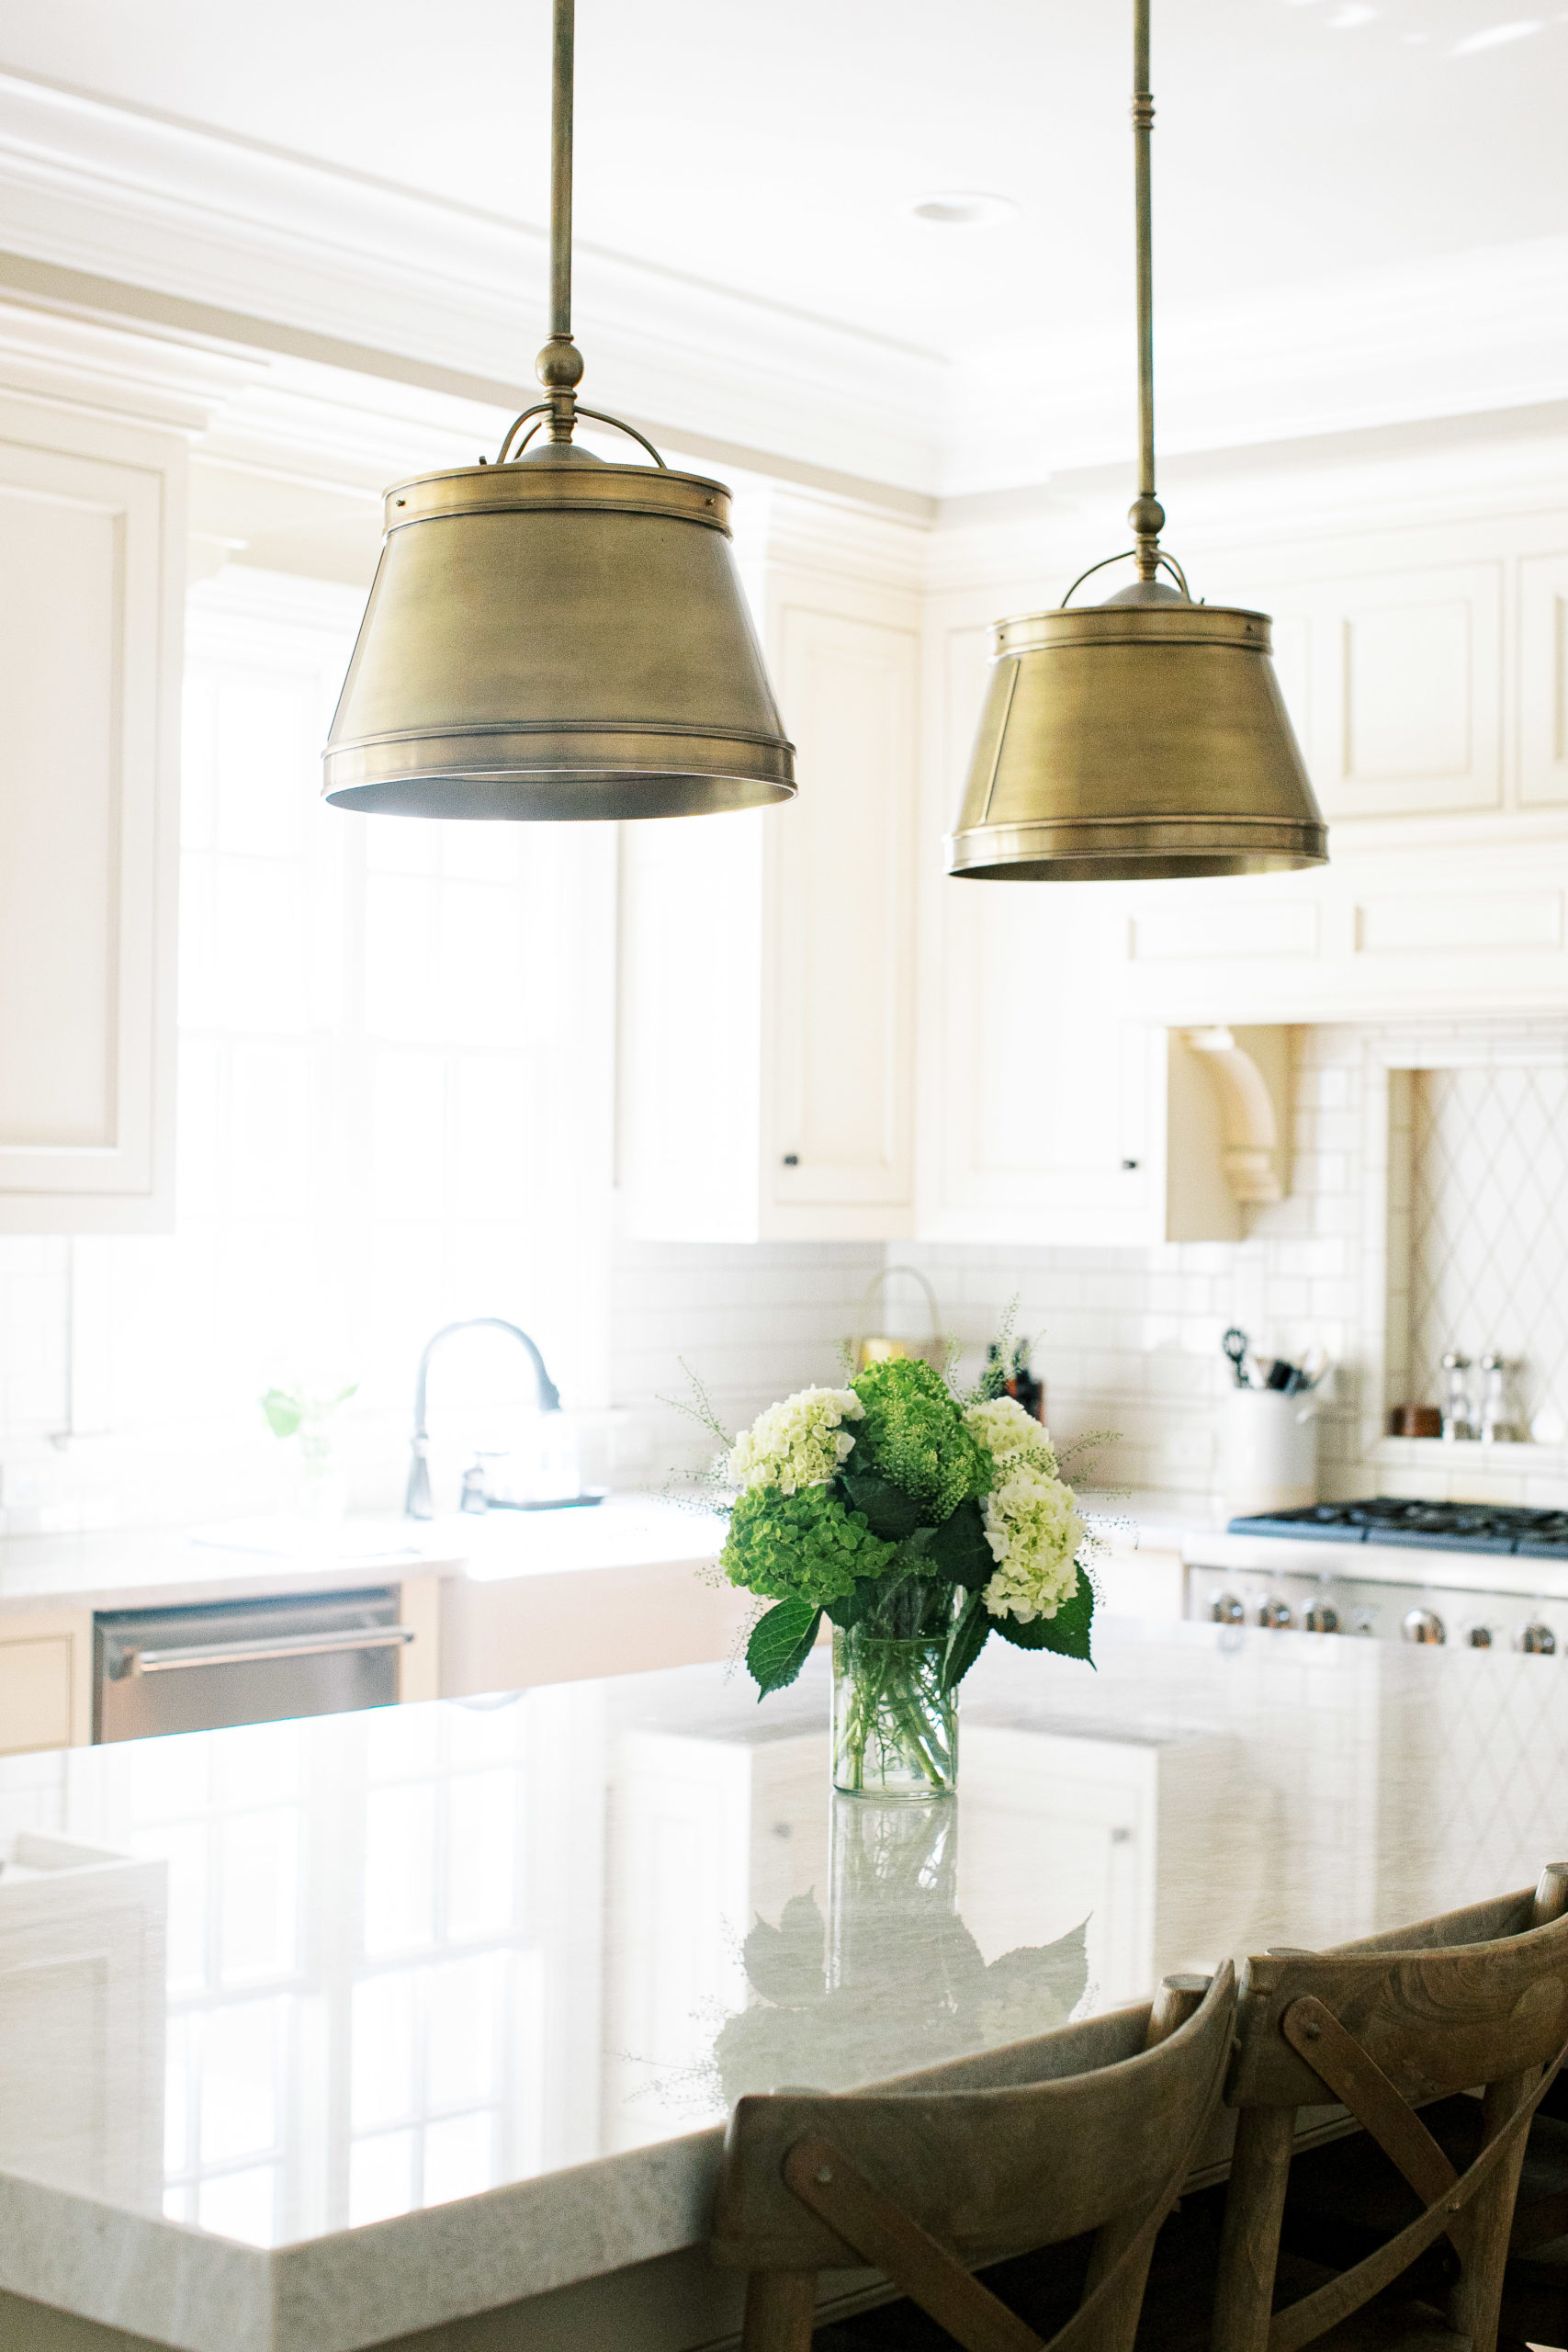 Our Bright and Airy Kitchen